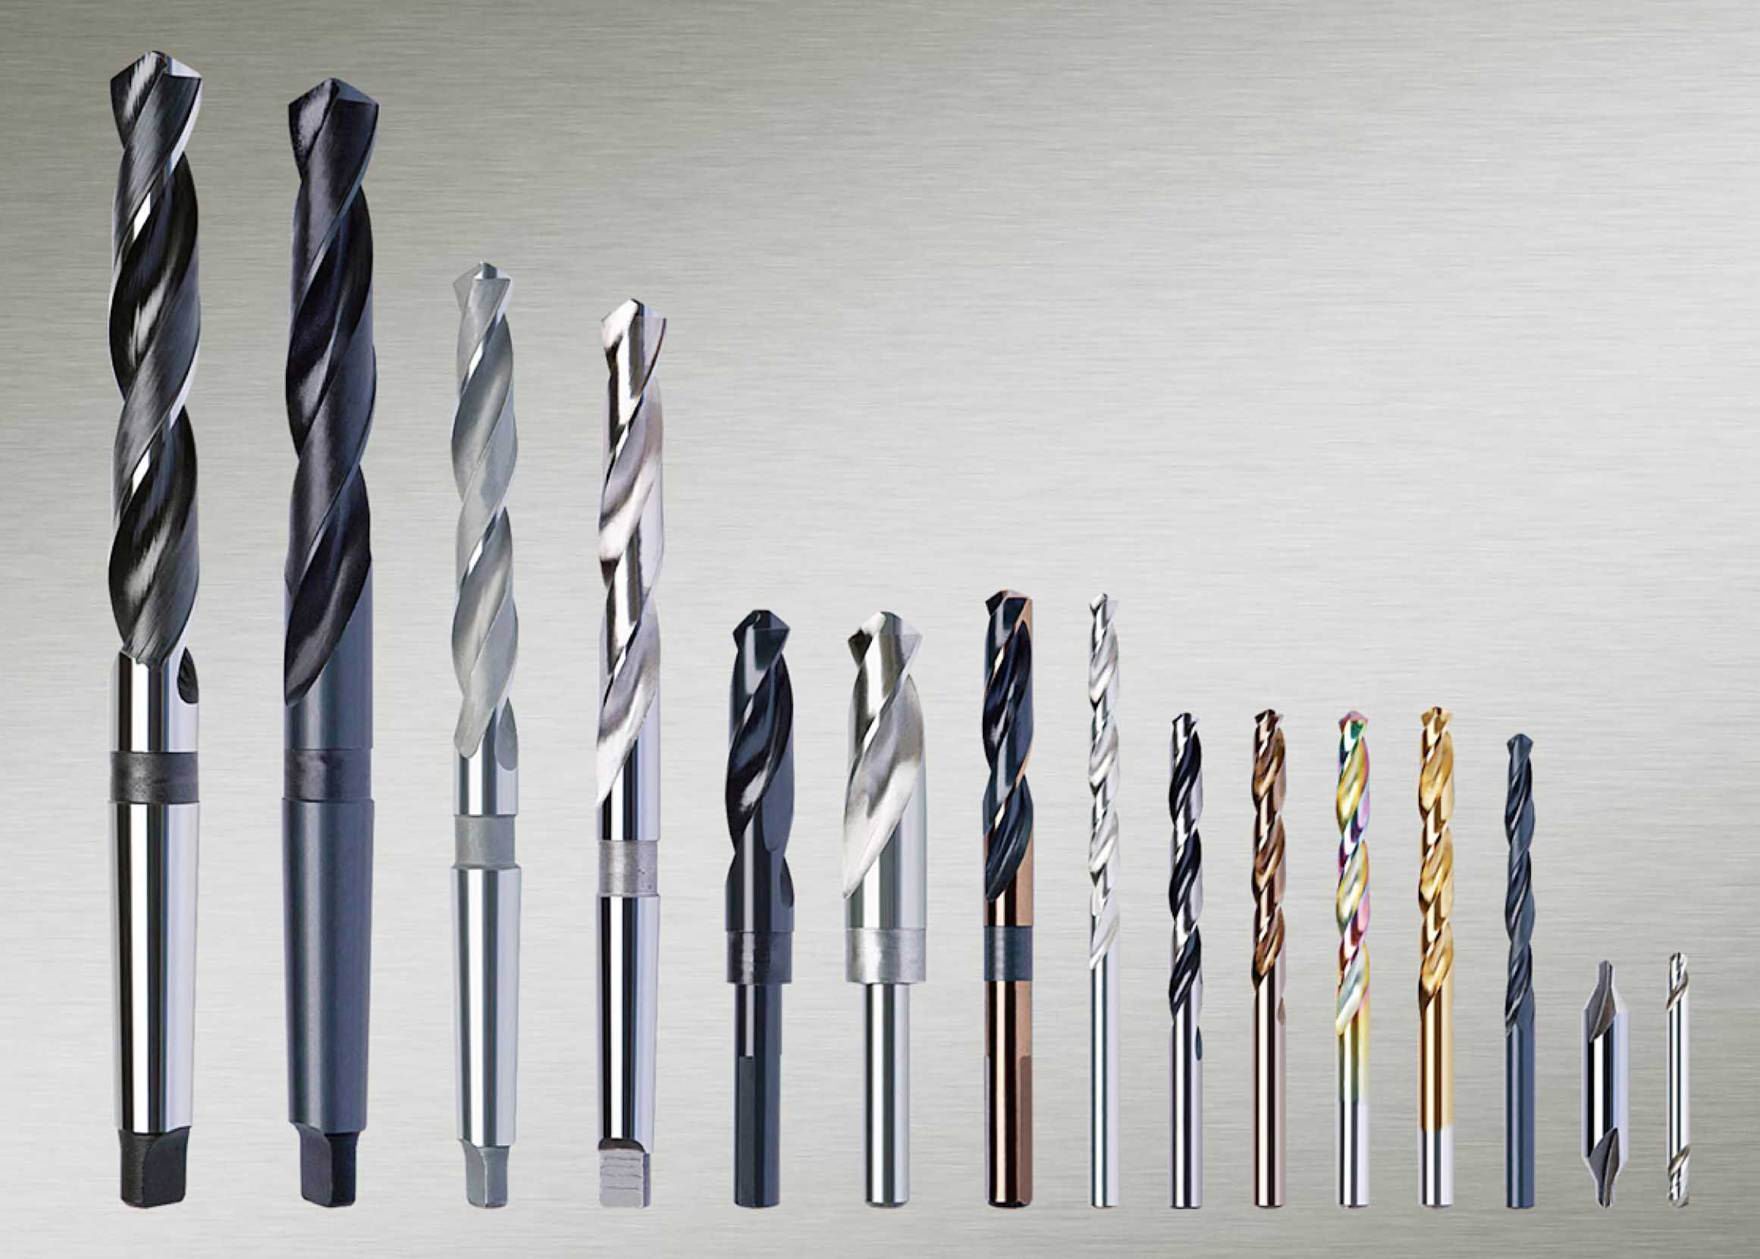 Some Quick Facts about Drill Bits